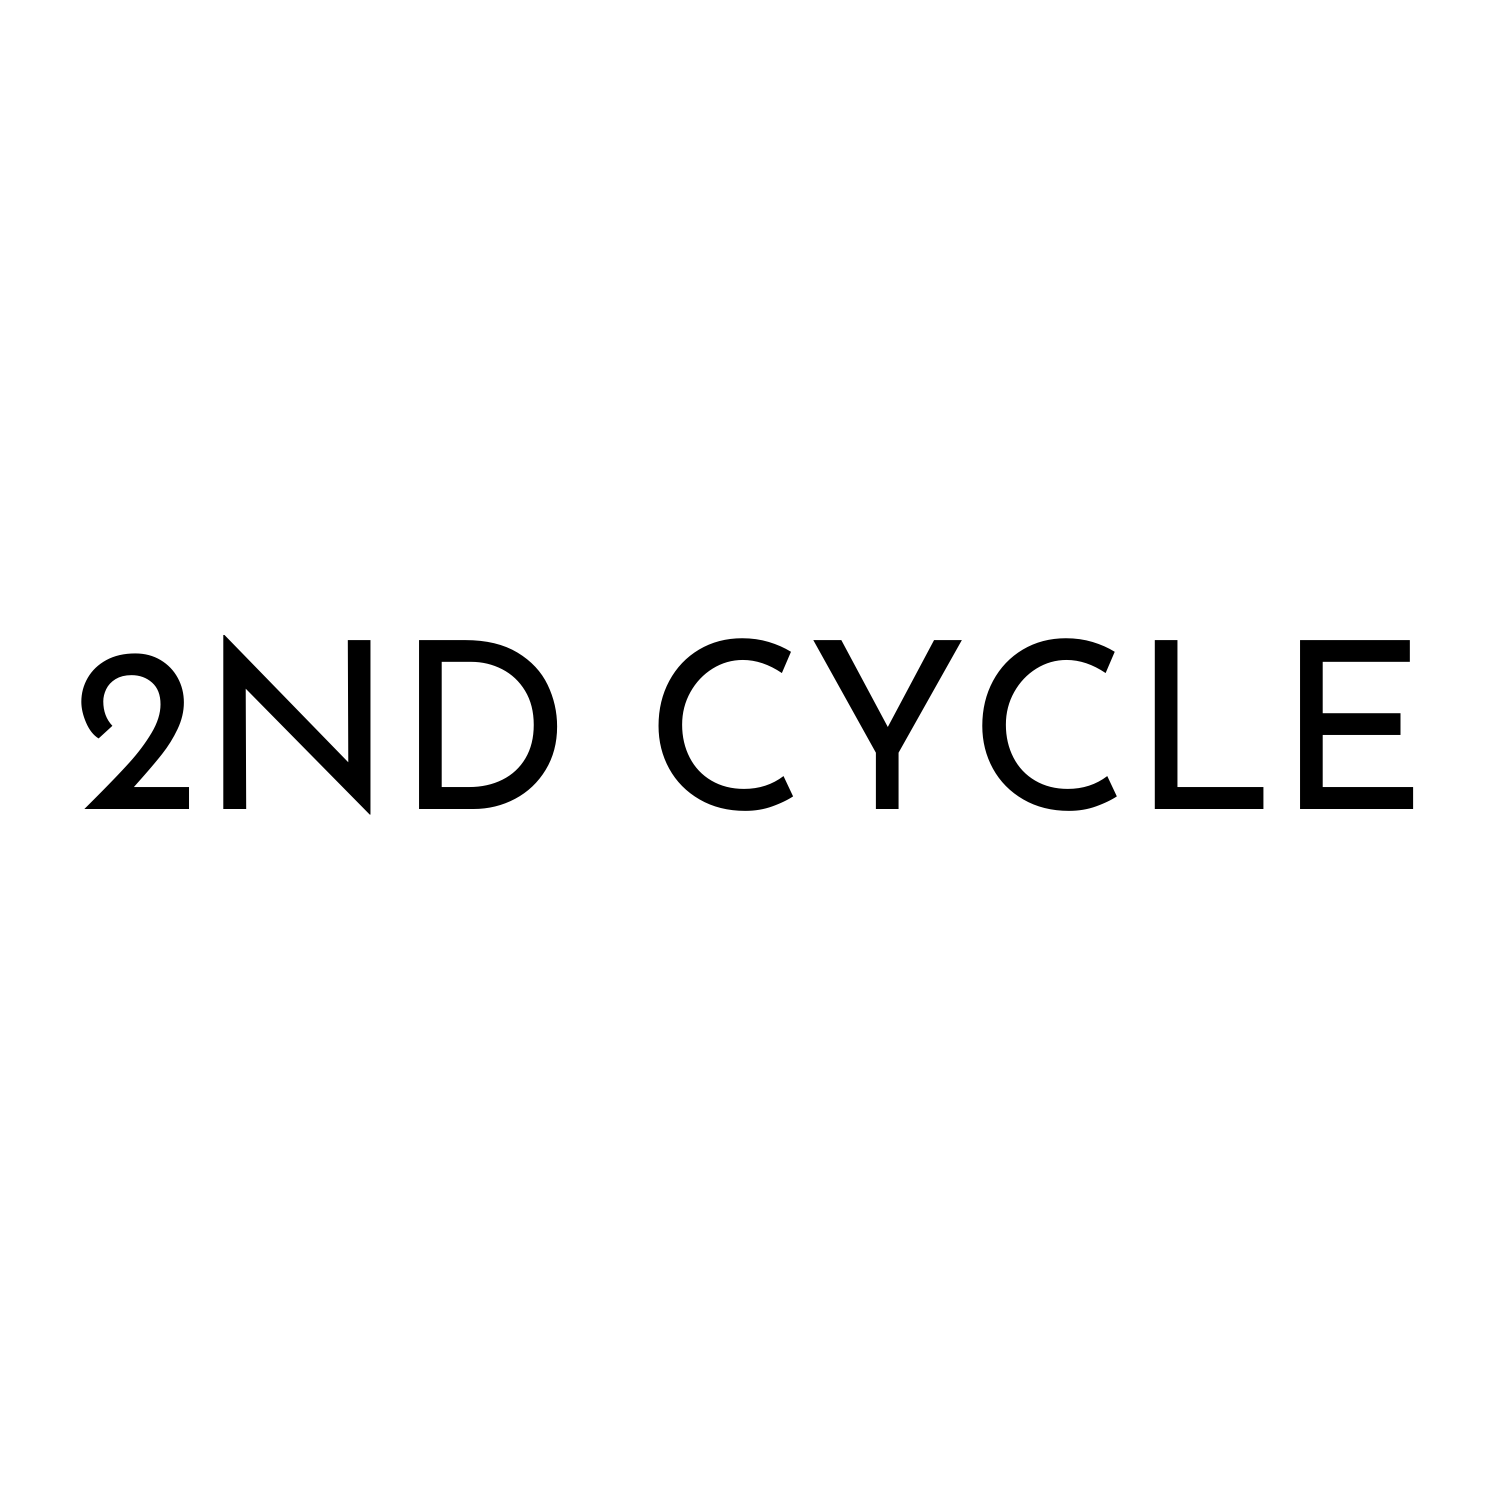 2ND CYCLE